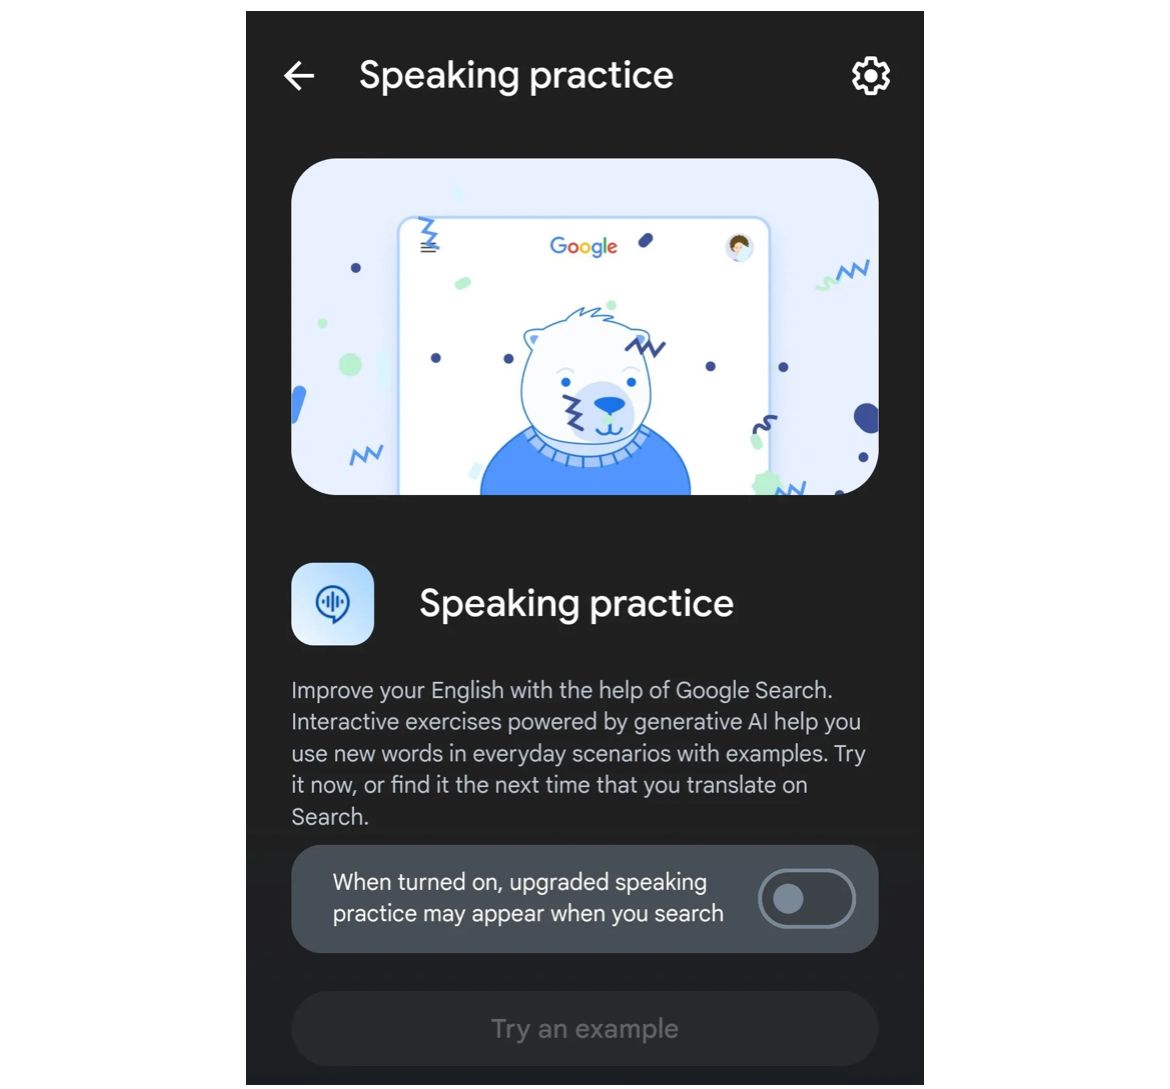 Google Search adds ‘Speaking practice’ tool for English learners, powered by AI